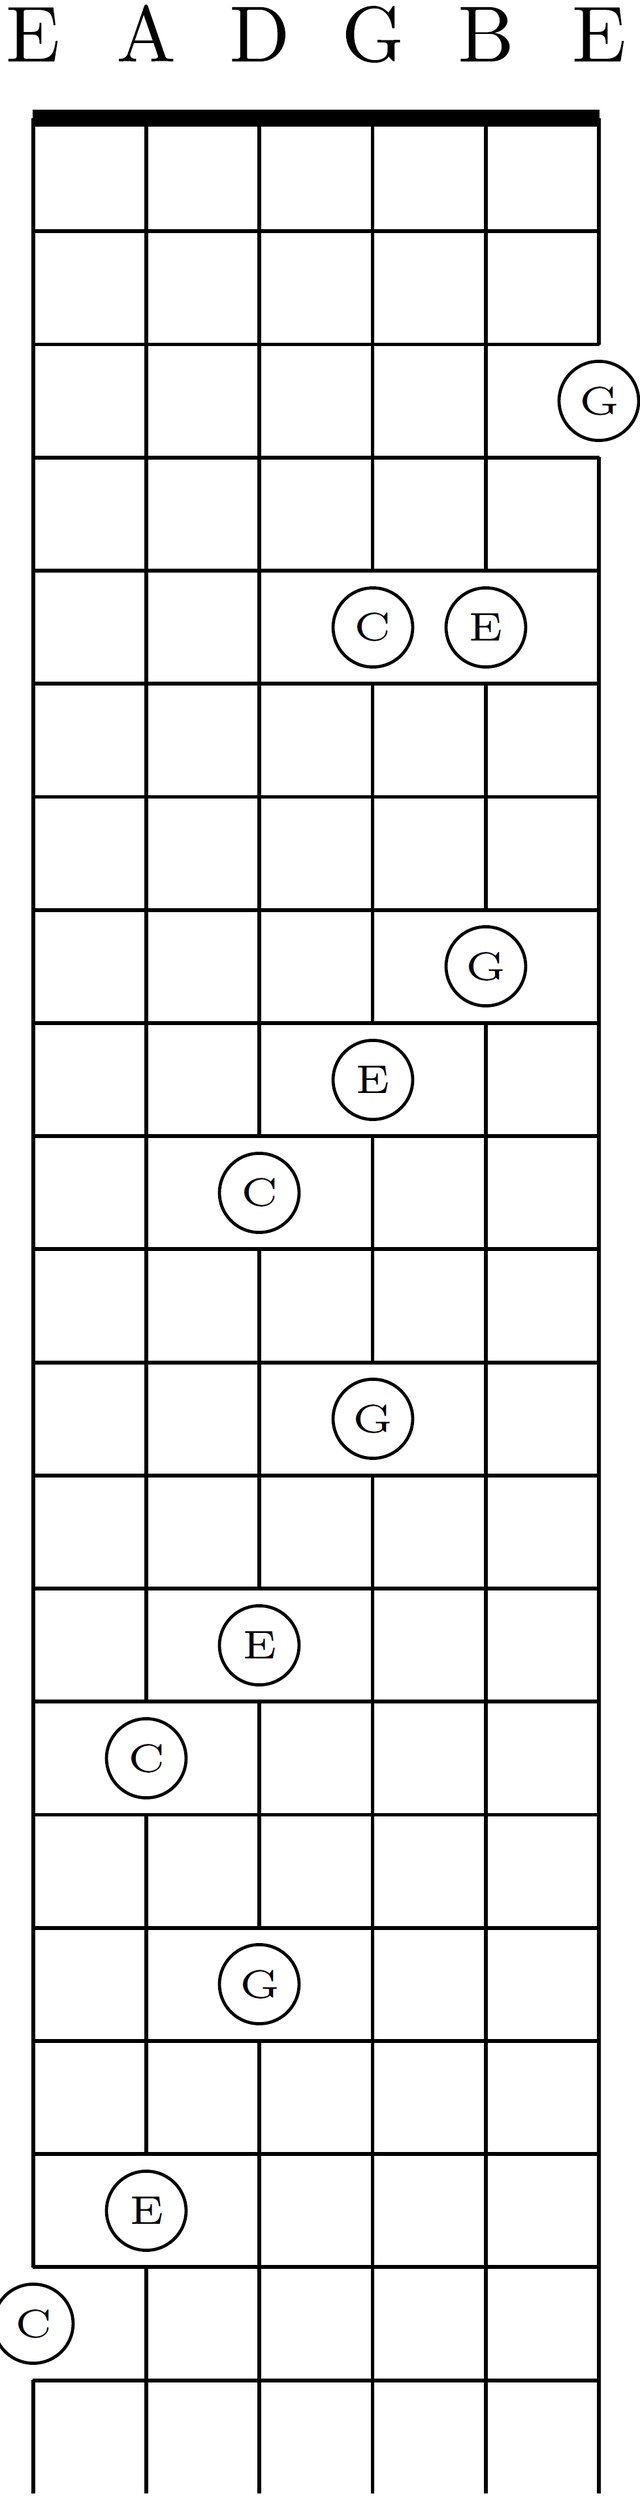 In standard tuning, the C-major chord has three shapes because of the irregular major-third between the G- and B-strings.